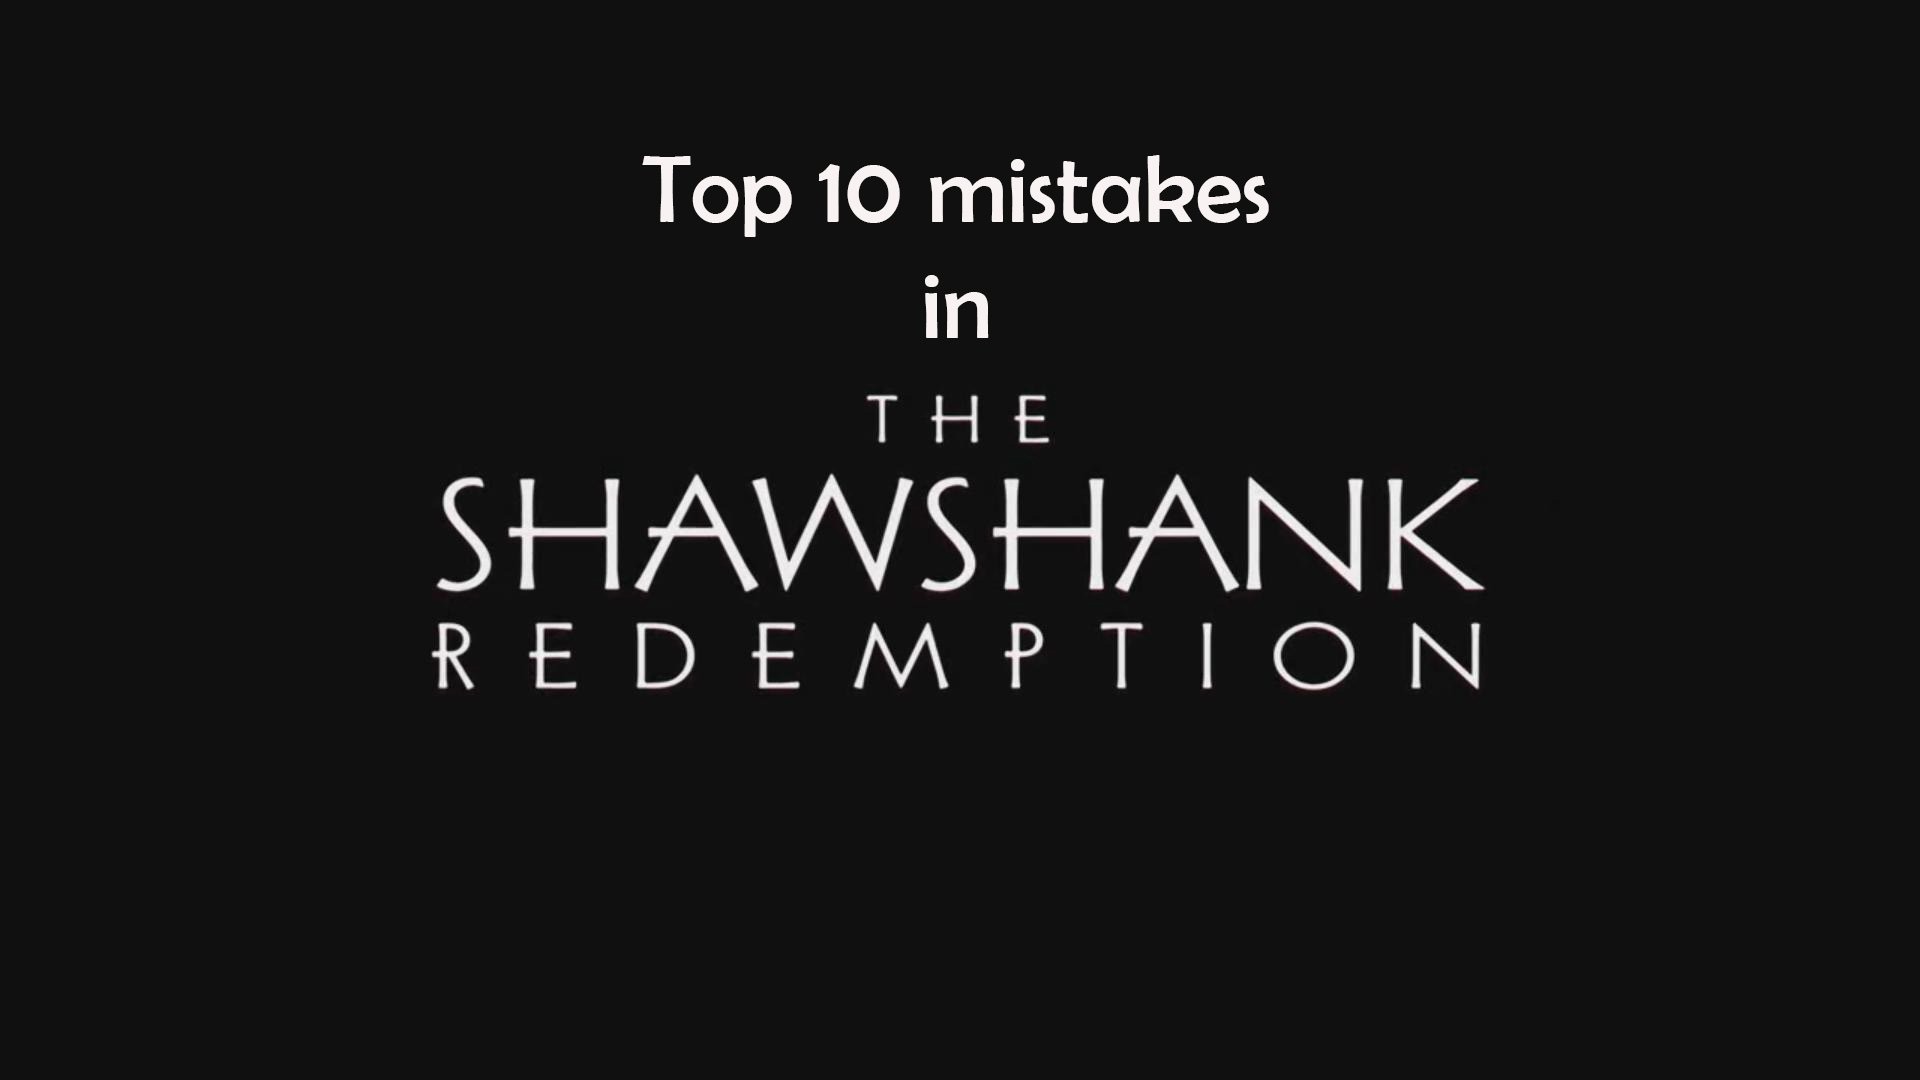 1920x1080 Top 10 mistakes in The Shawshank Redemption